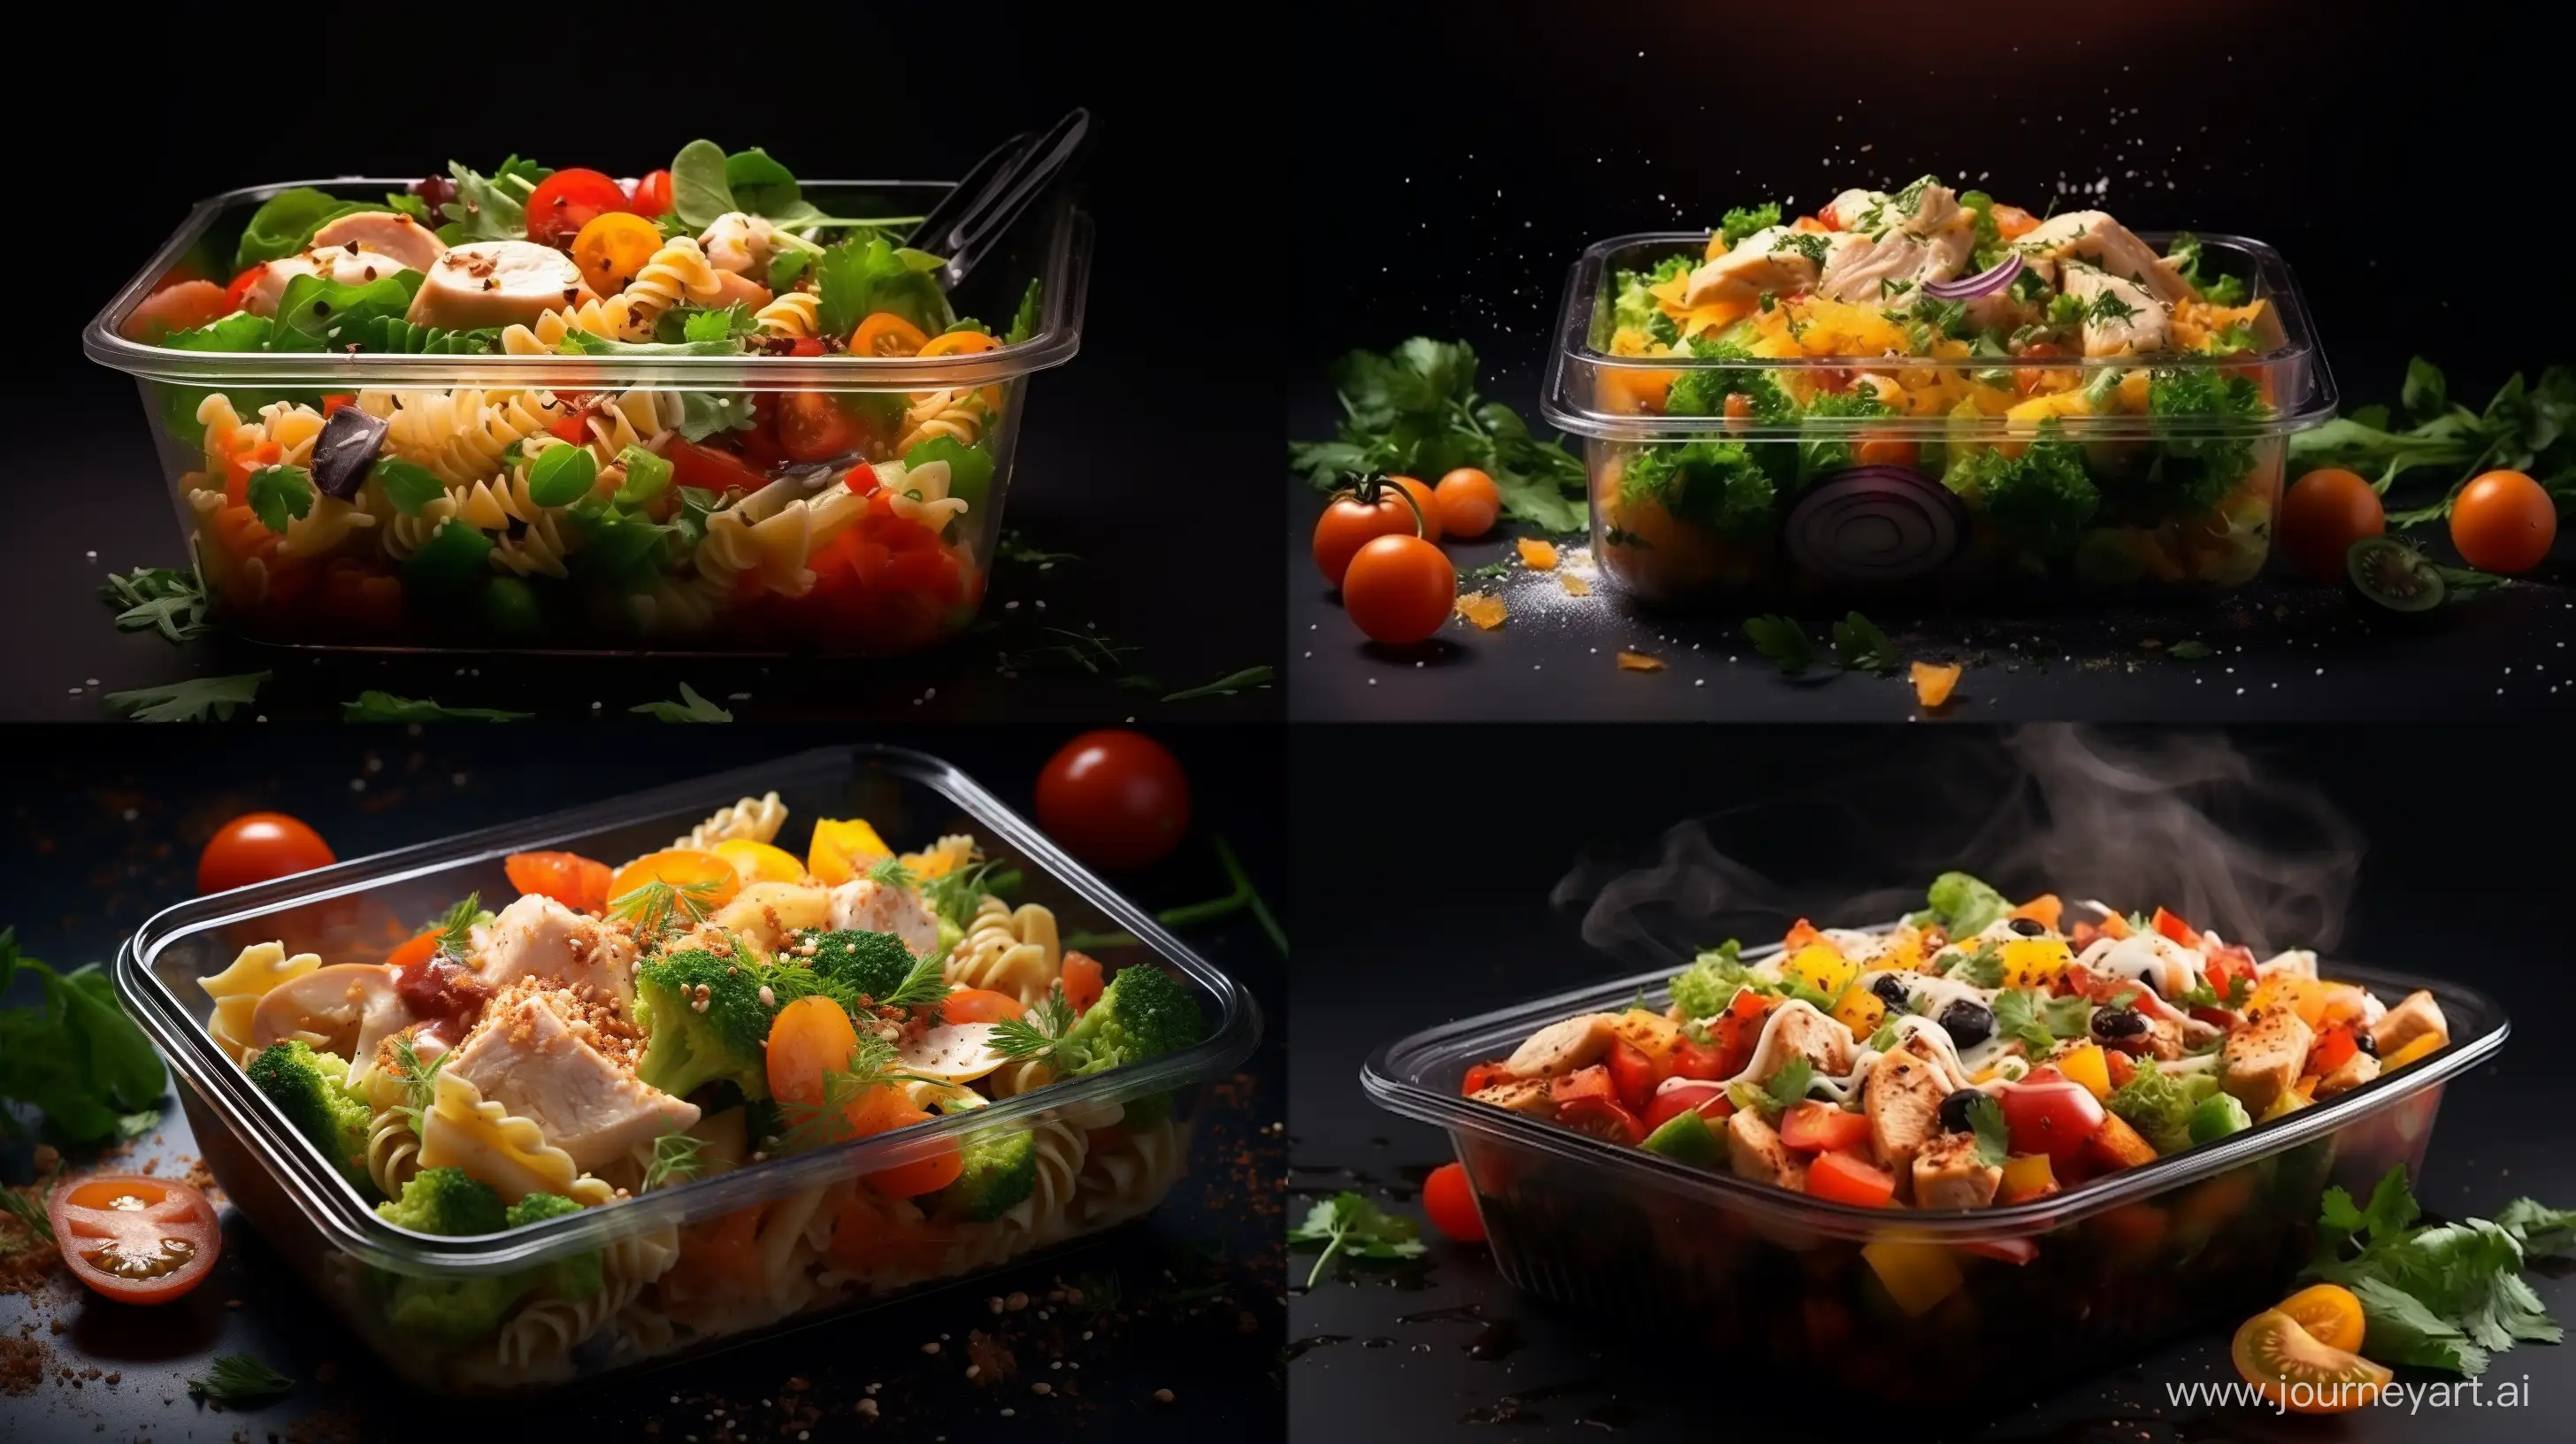 Pasta salad with chicken and vegetables in a food container, hyper-realistic photo --ar 16:9